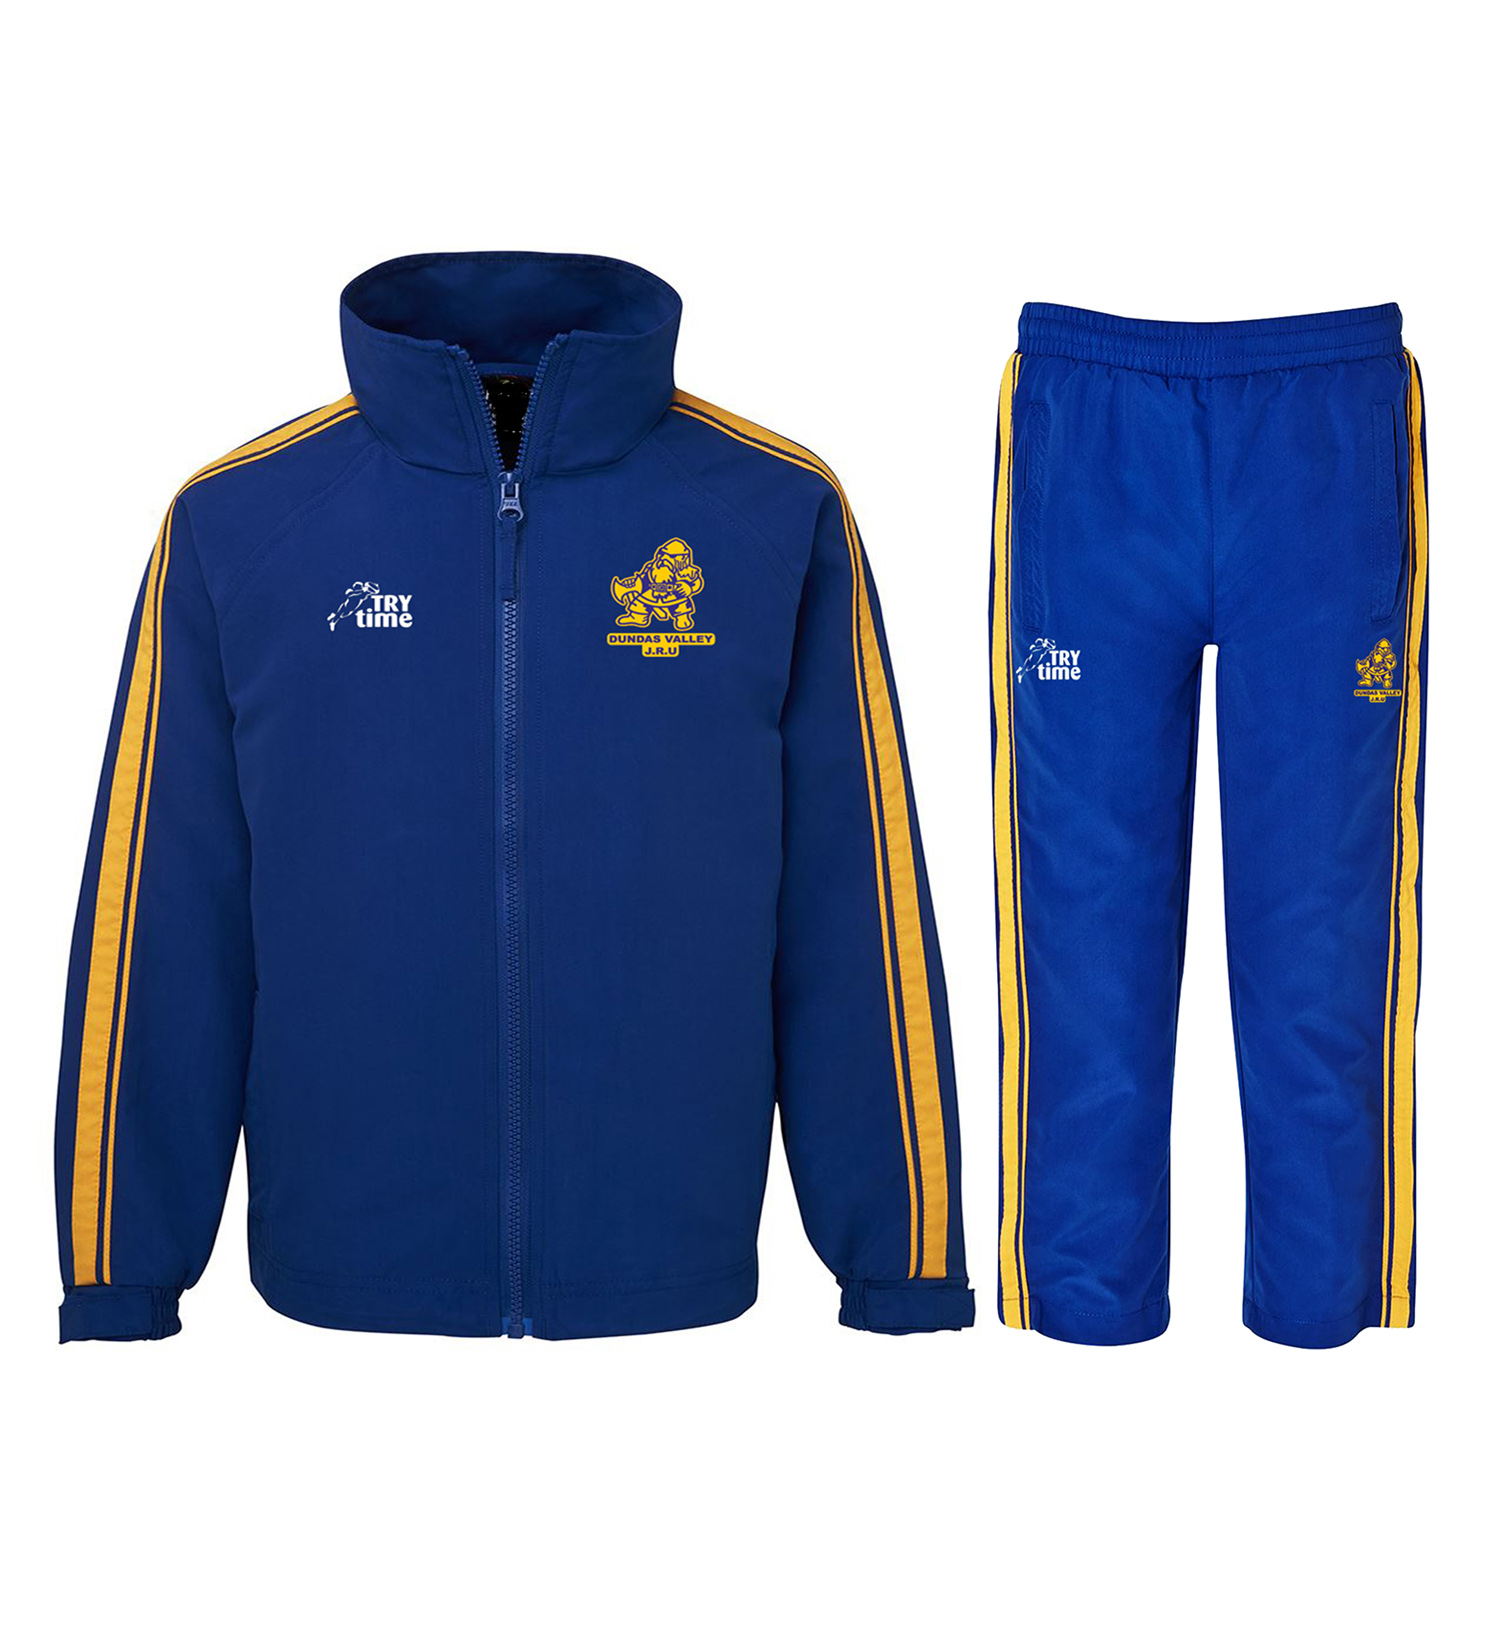 Branded Tracksuit In Ludhiana, Punjab At Best Price | Branded Tracksuit  Manufacturers, Suppliers In Ludhiana